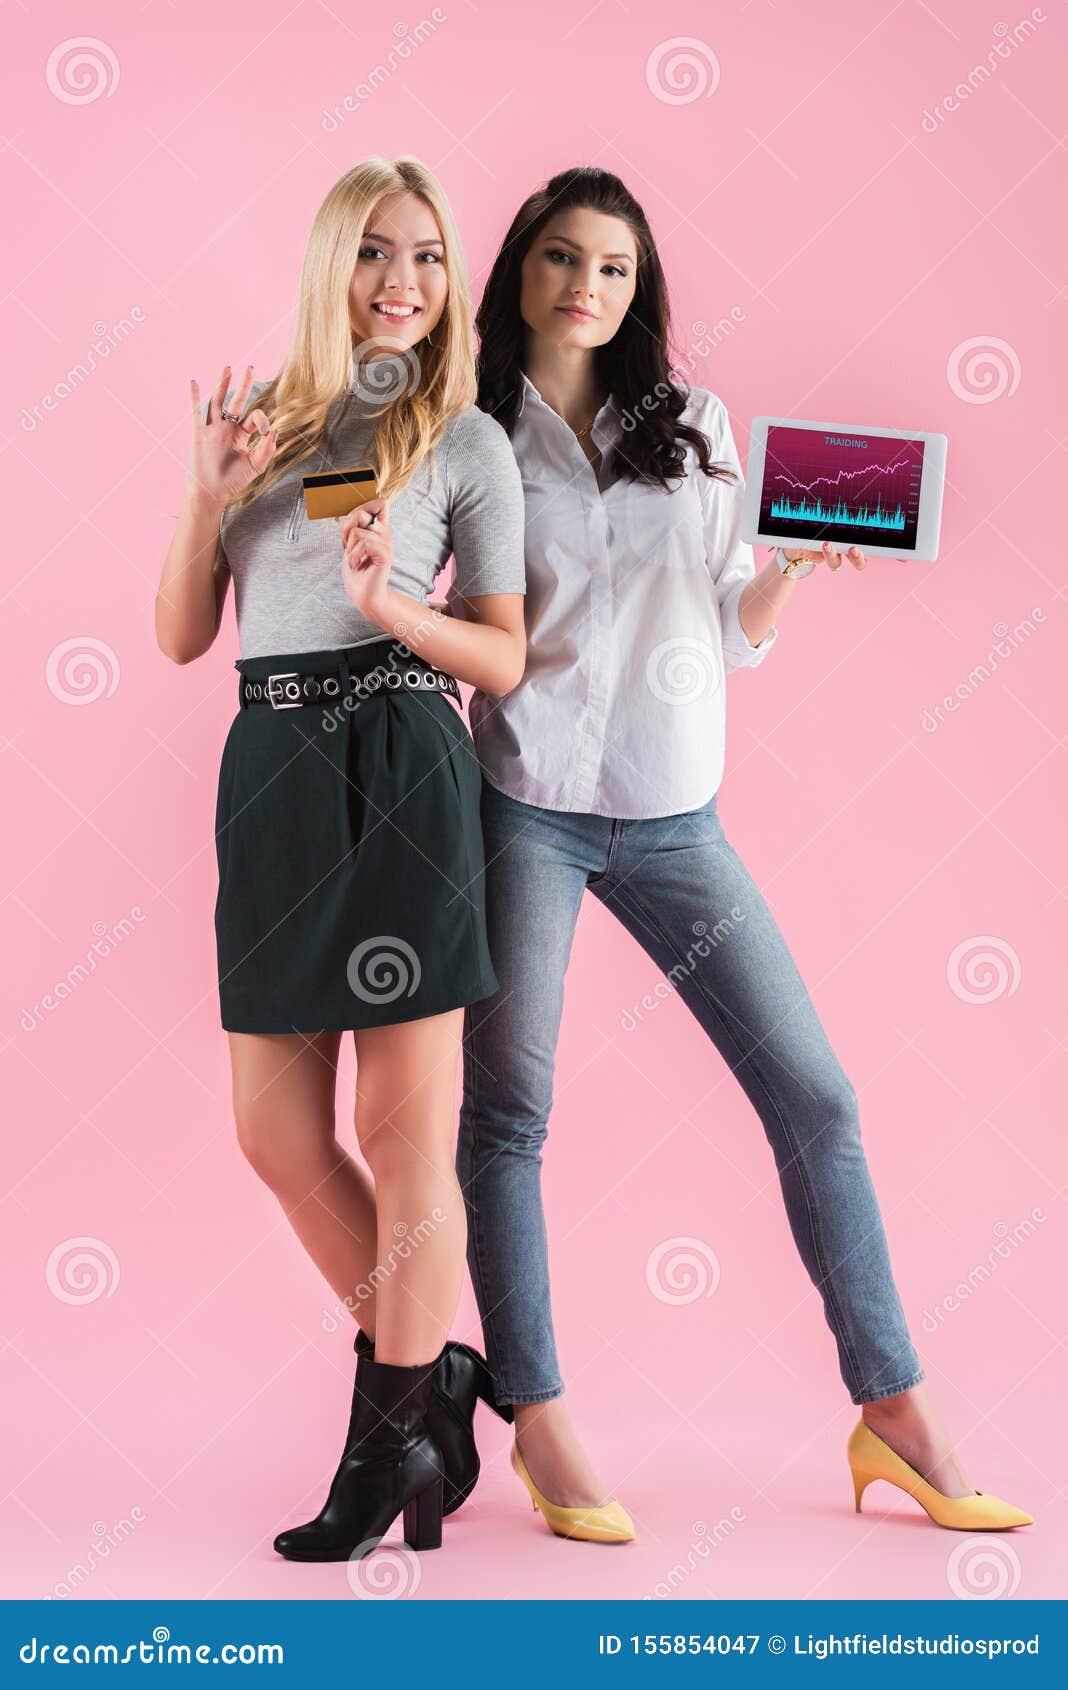 joyful girls holding digital tablet with traiding app on screen and credit card